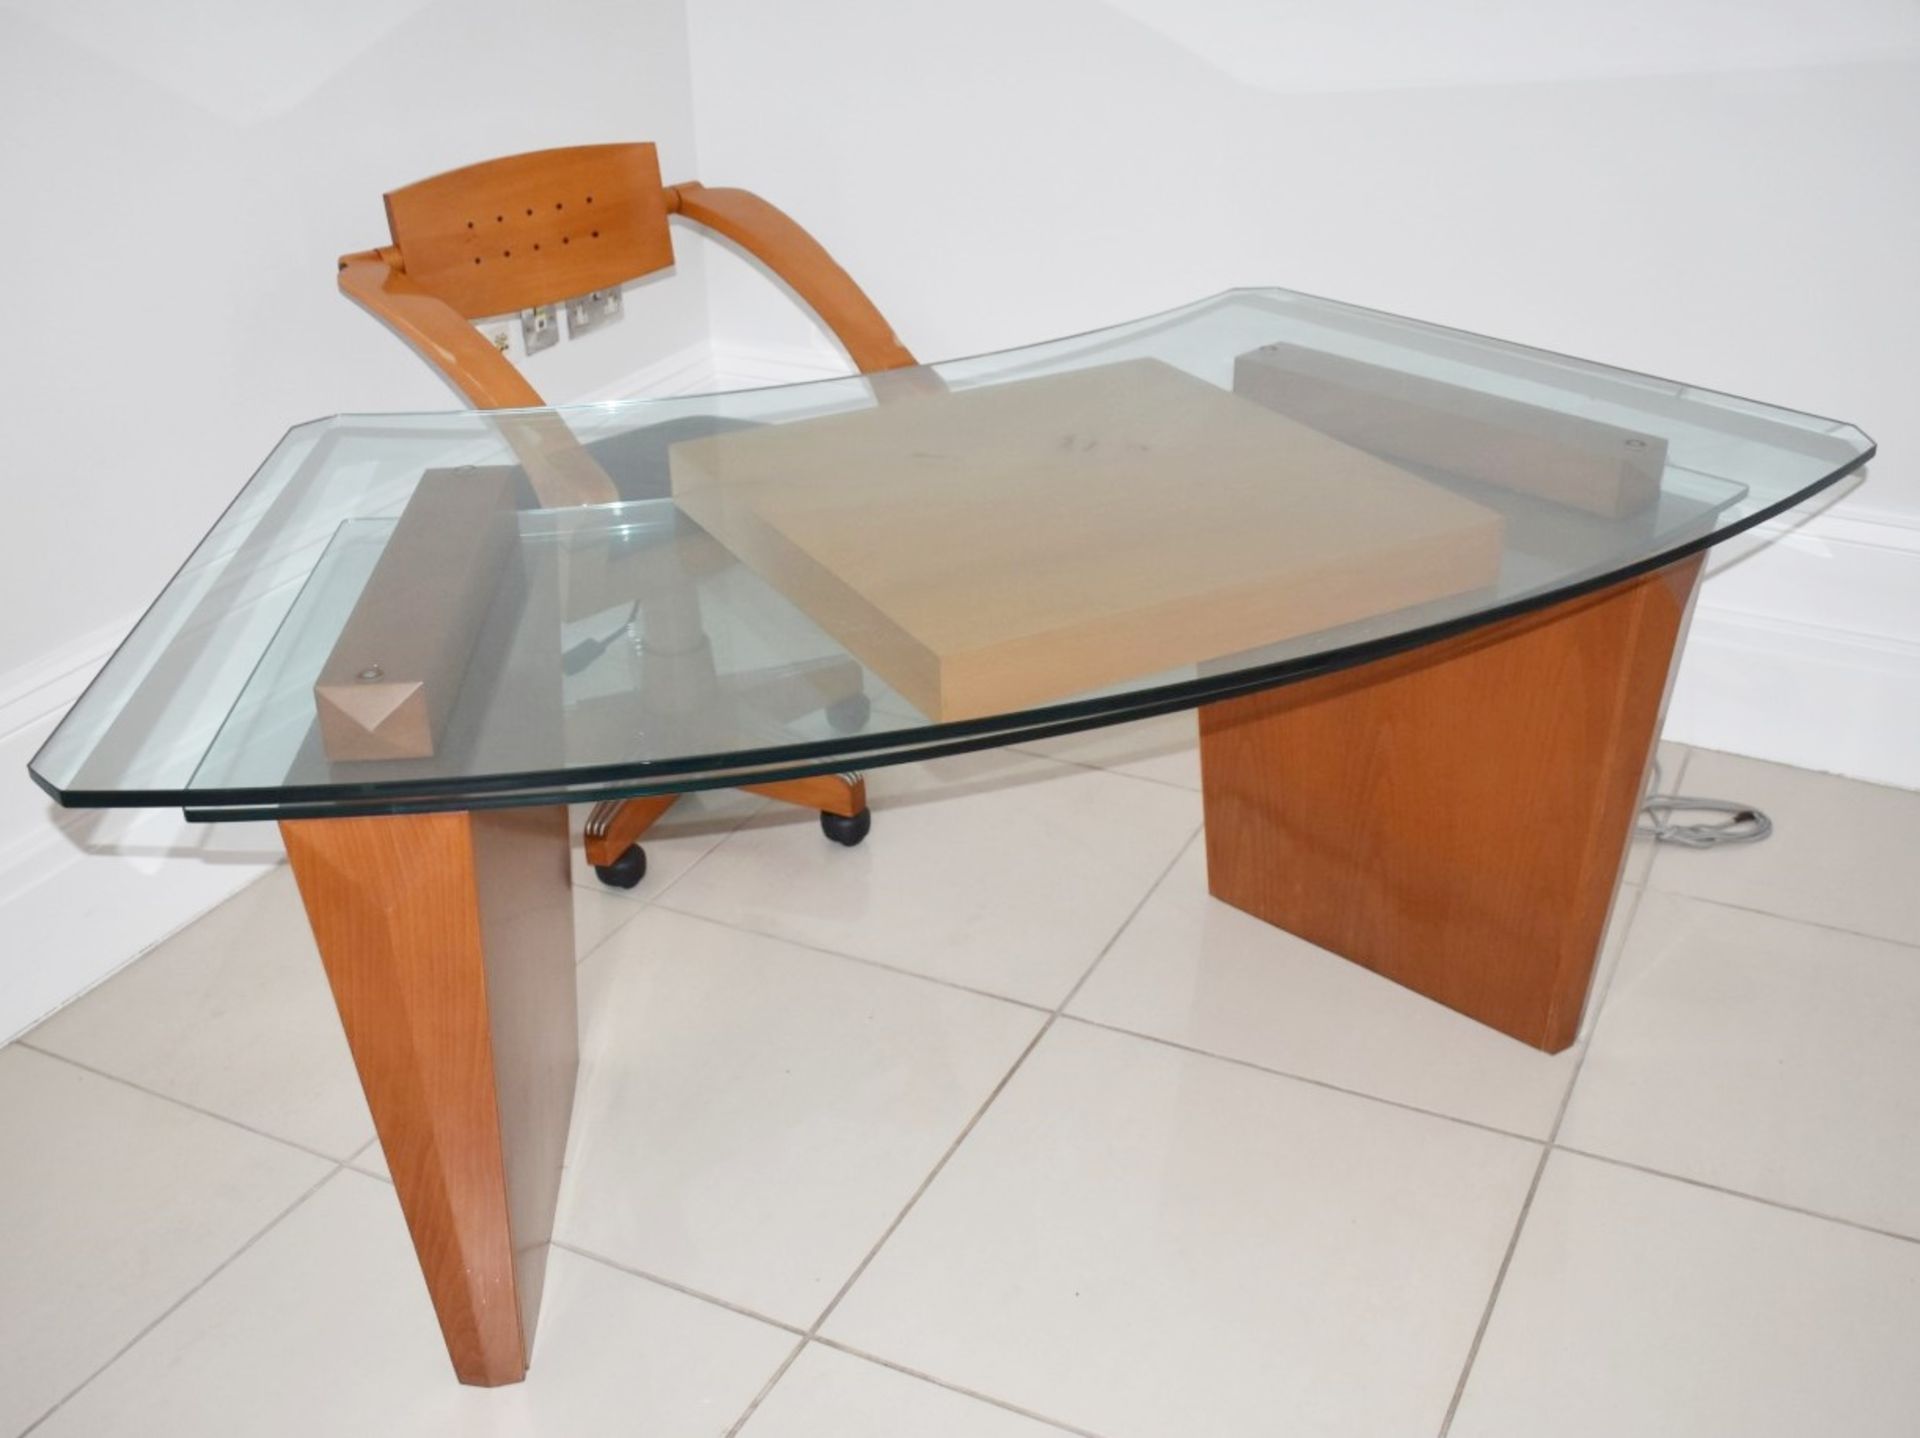 1 x Giorgetti Office Desk With Two Spring Chairs By Massimo Scolari - From an Exclusive Hale - Image 14 of 34